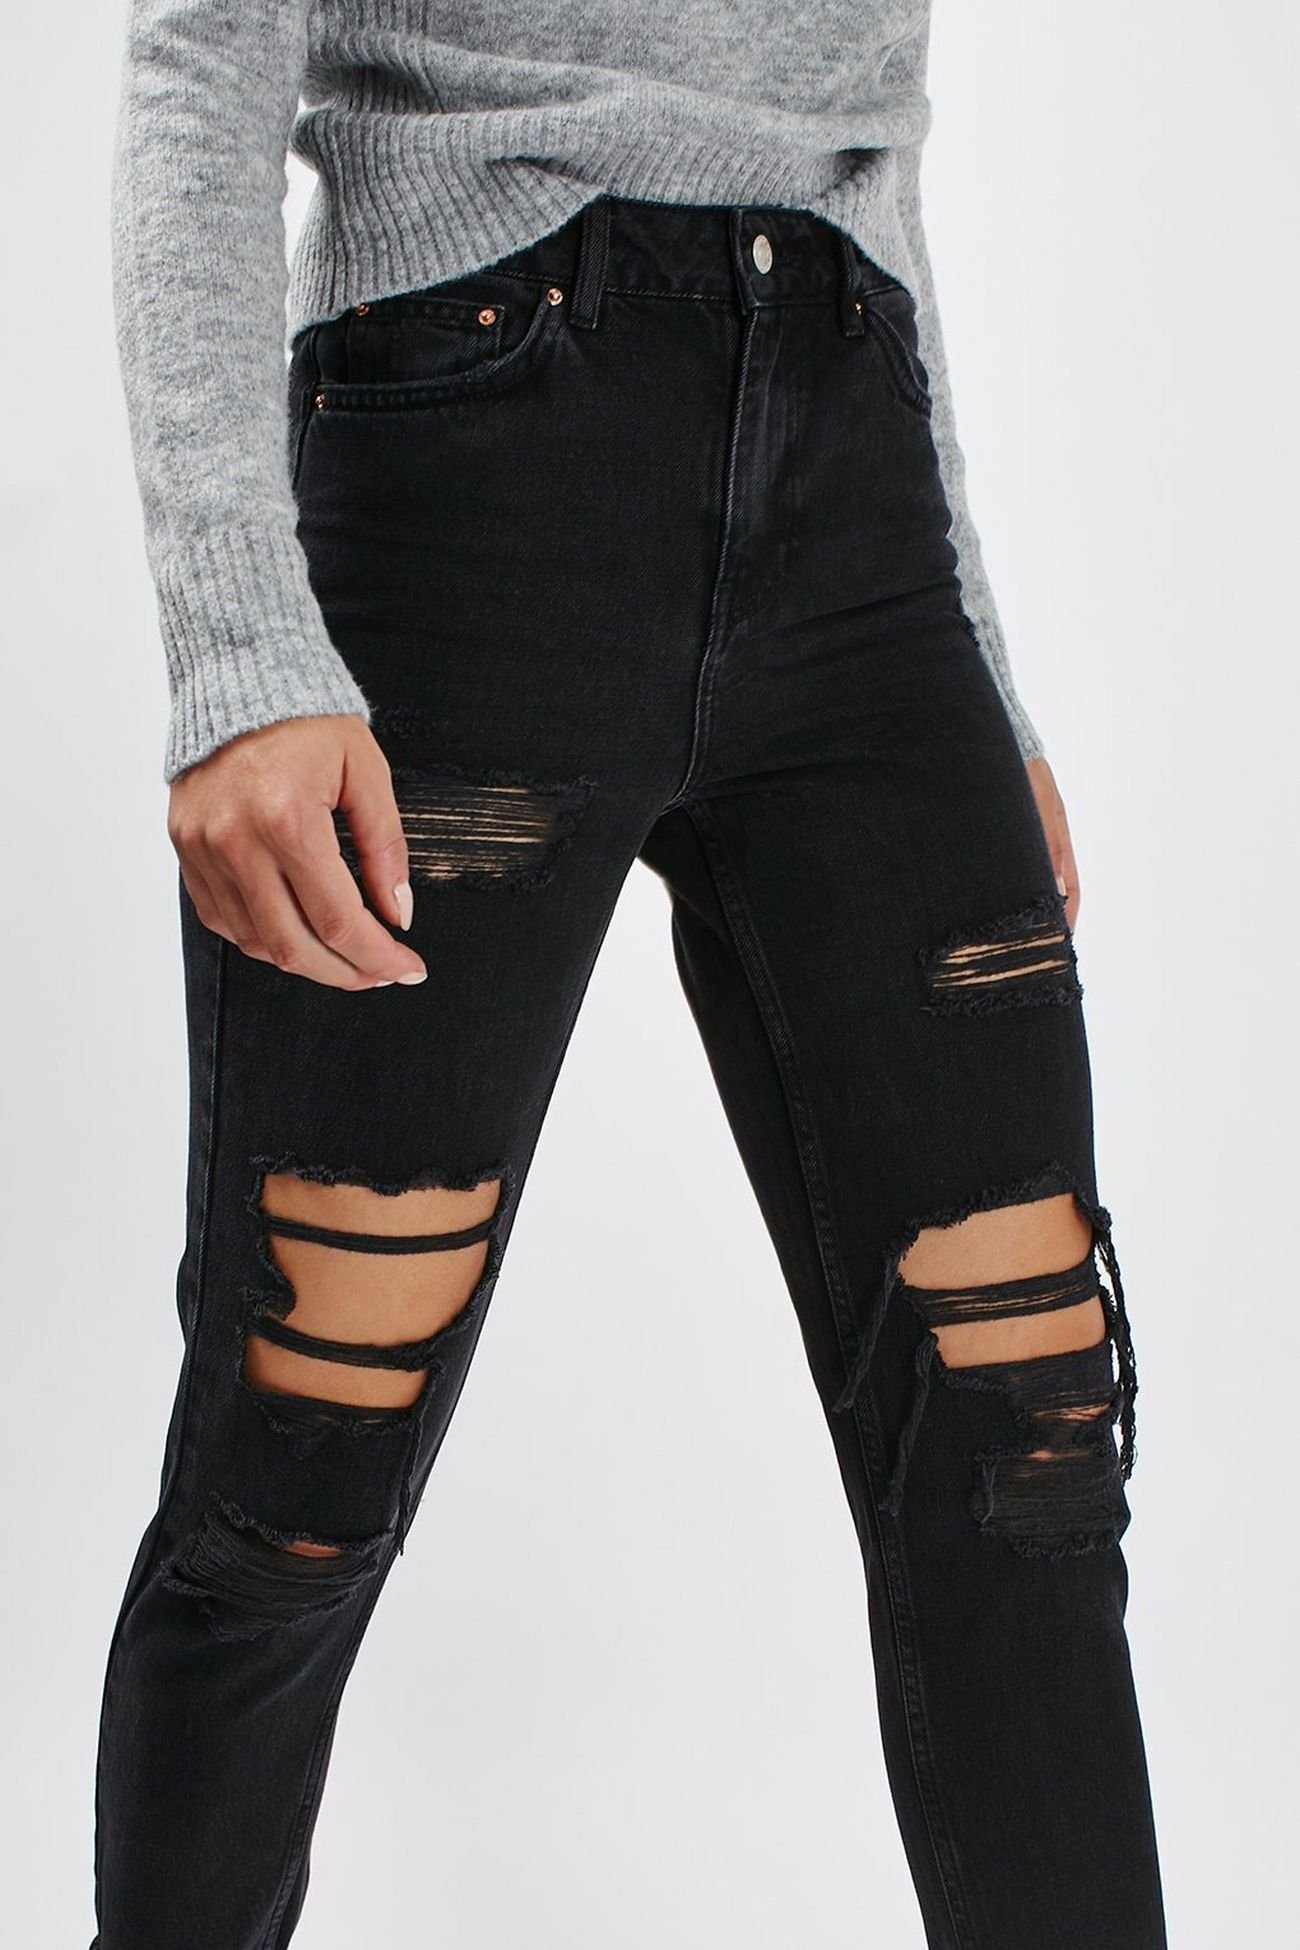 Black jeans with knee holes » Wallpapers and Images